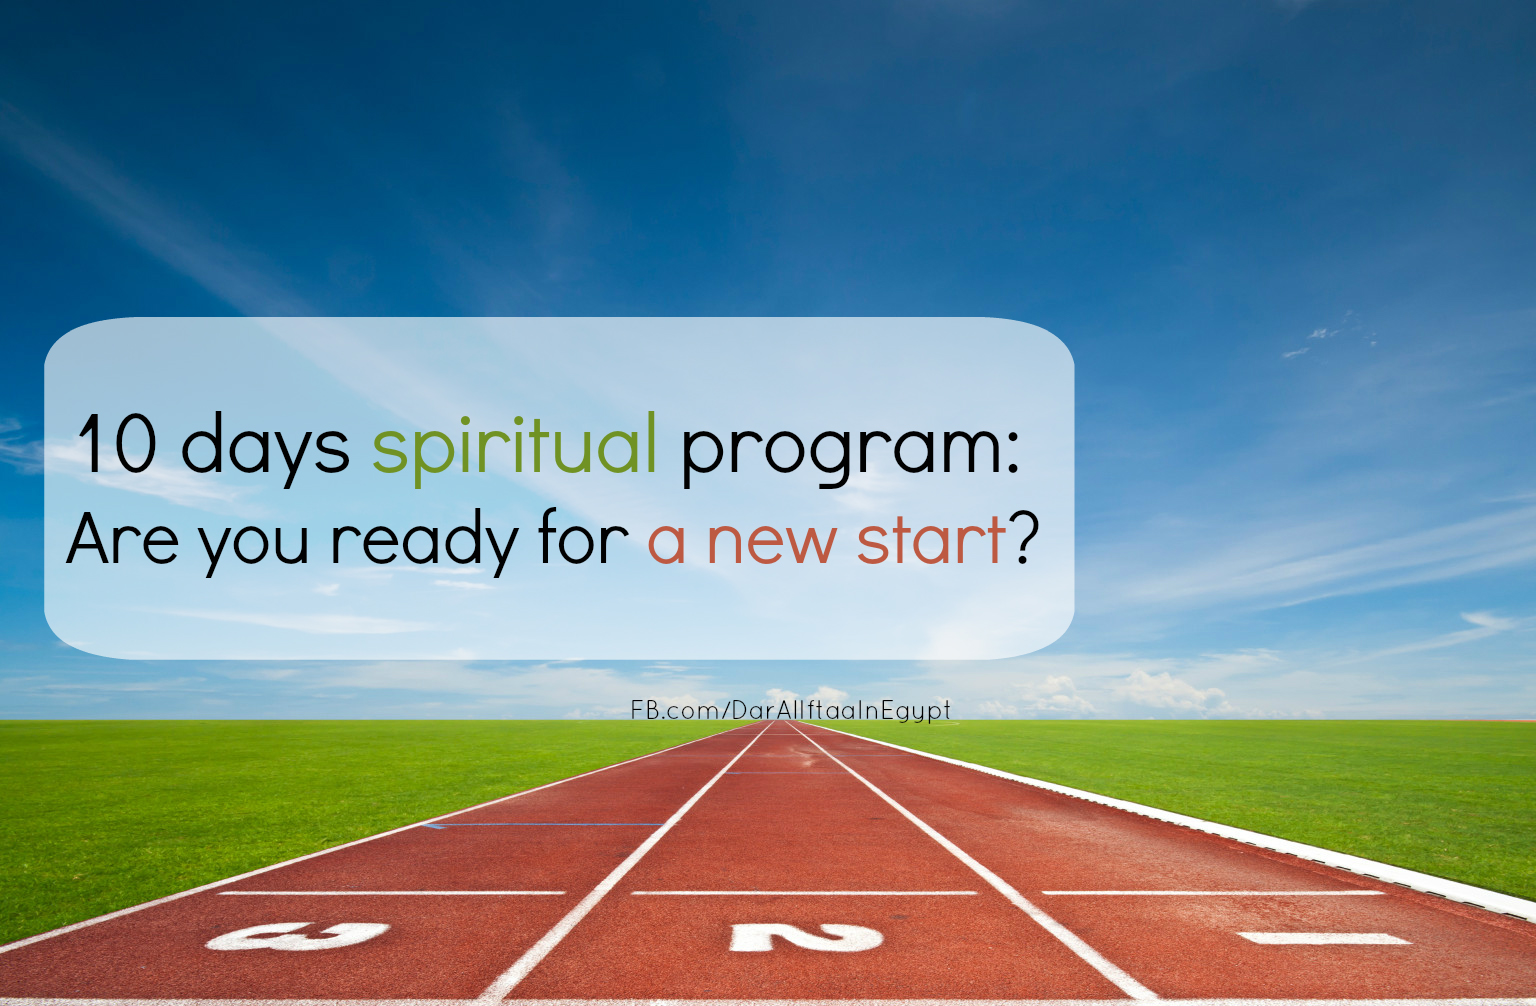 10 days spiritual program: Are you ready for a new start?